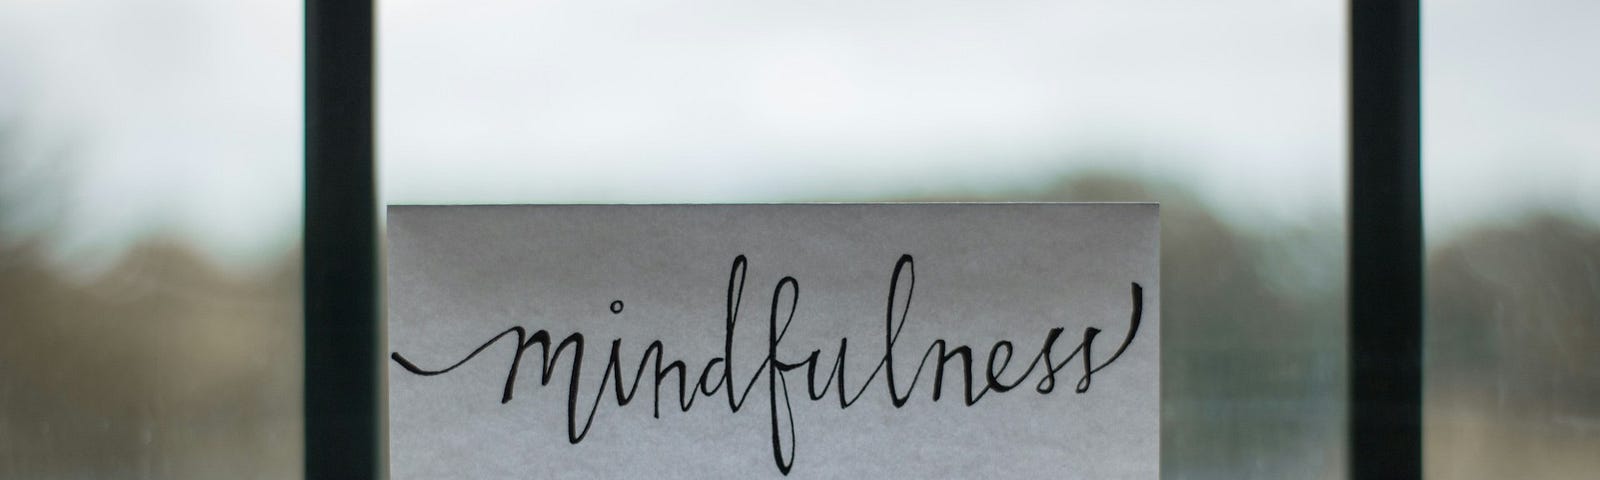 The word Mindfulness printed on white paper